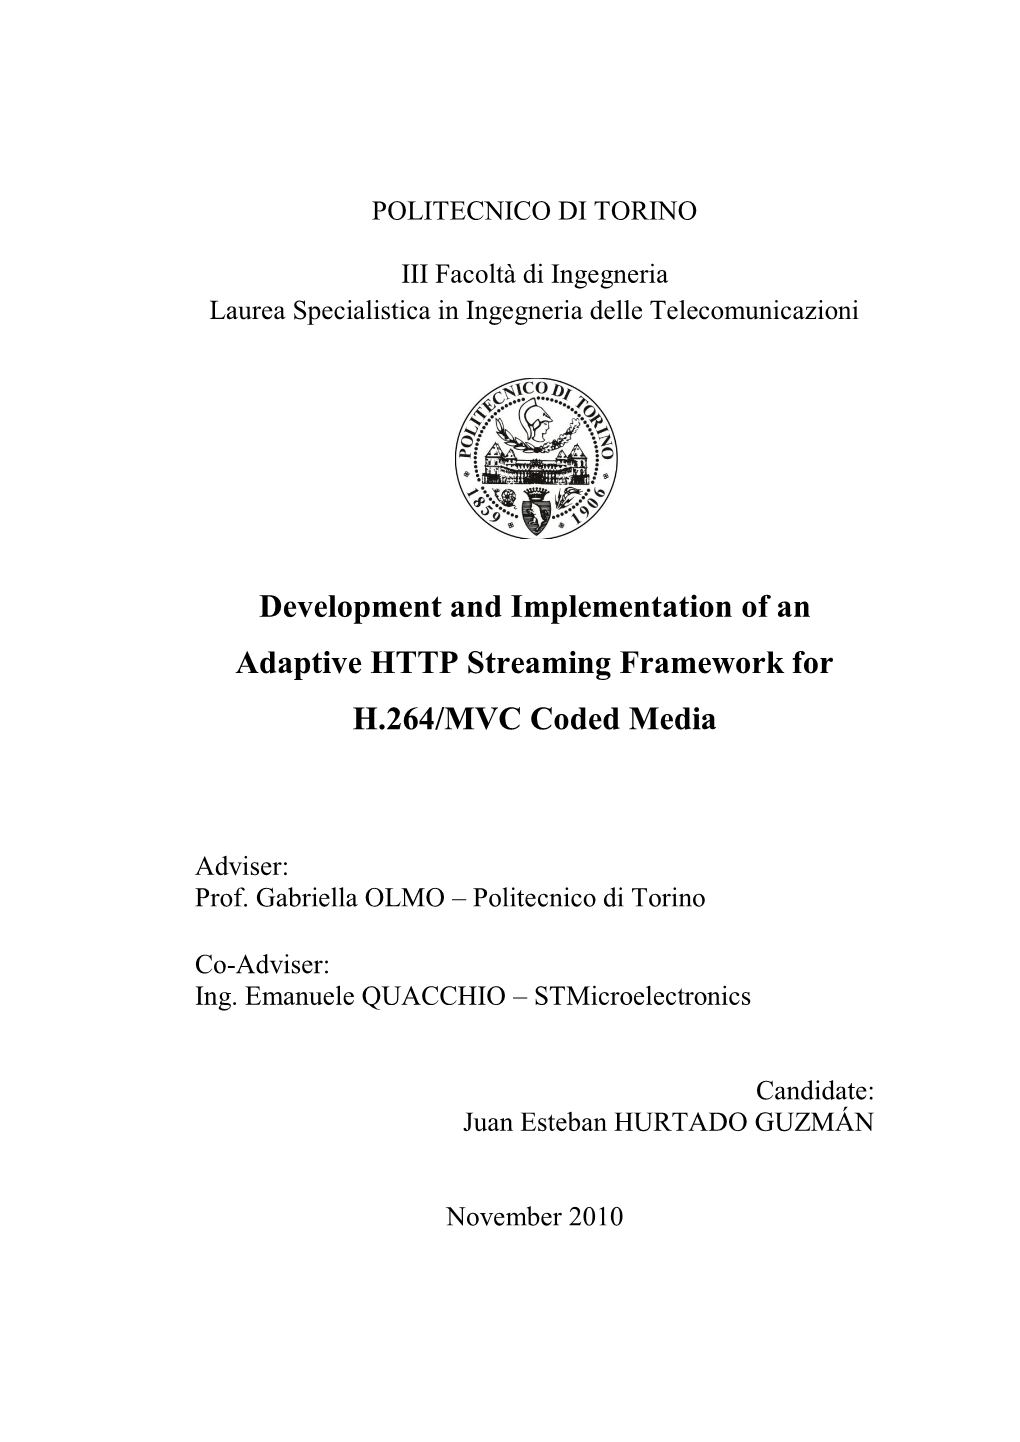 Development and Implementation of an Adaptive HTTP Streaming Framework for H.264/MVC Coded Media